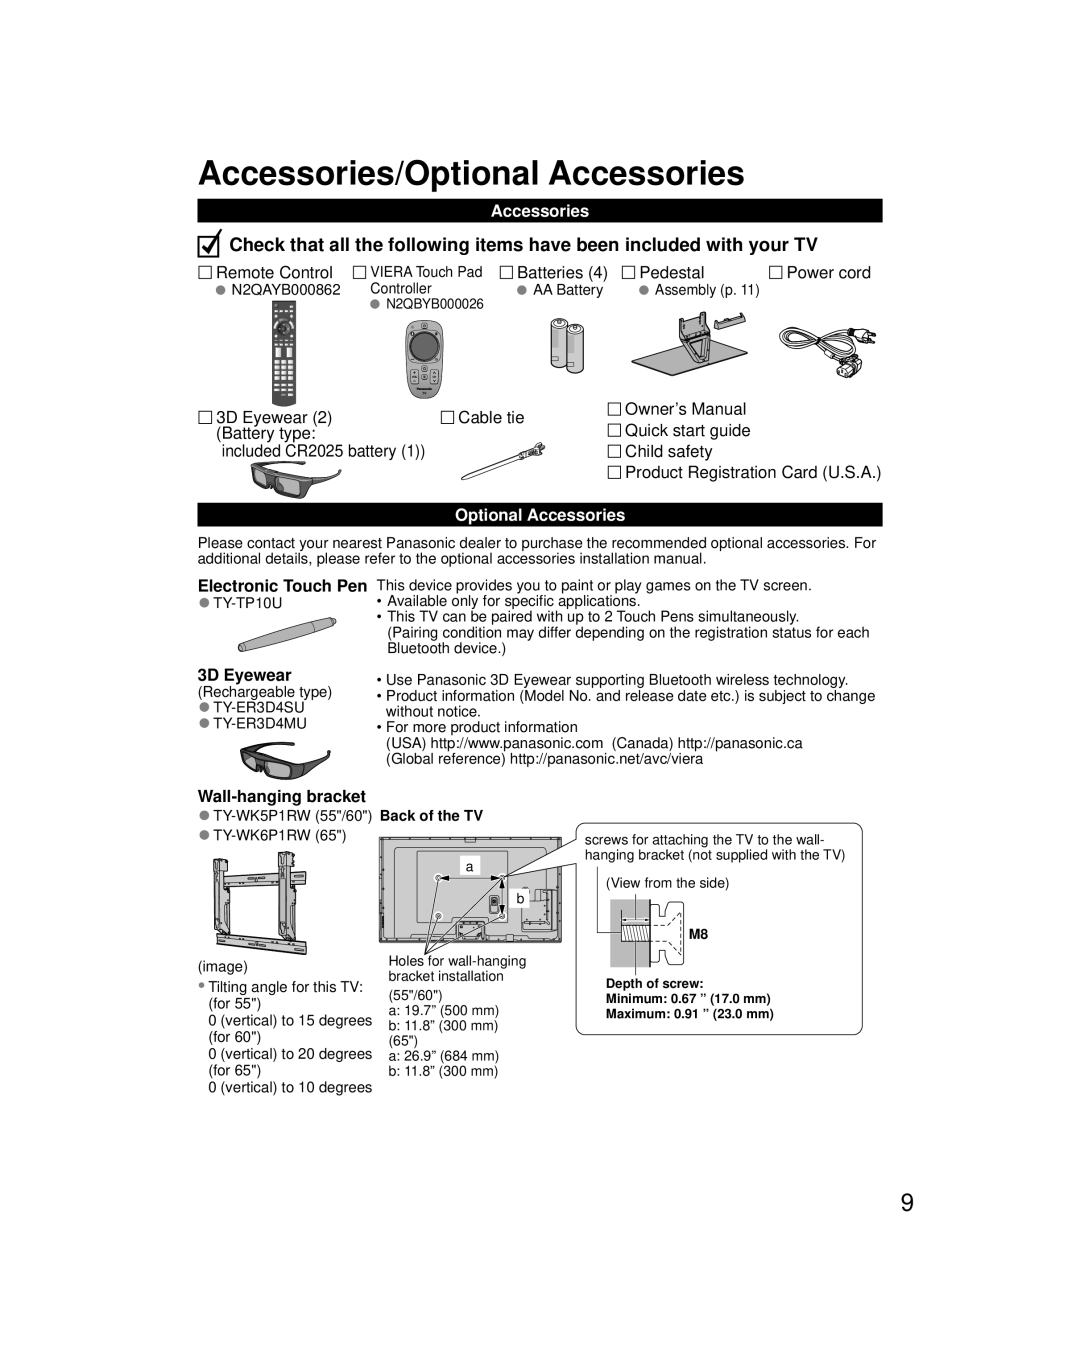 Panasonic TCP60VT60 Accessories/Optional Accessories, Check that all the following items have been included with your TV 